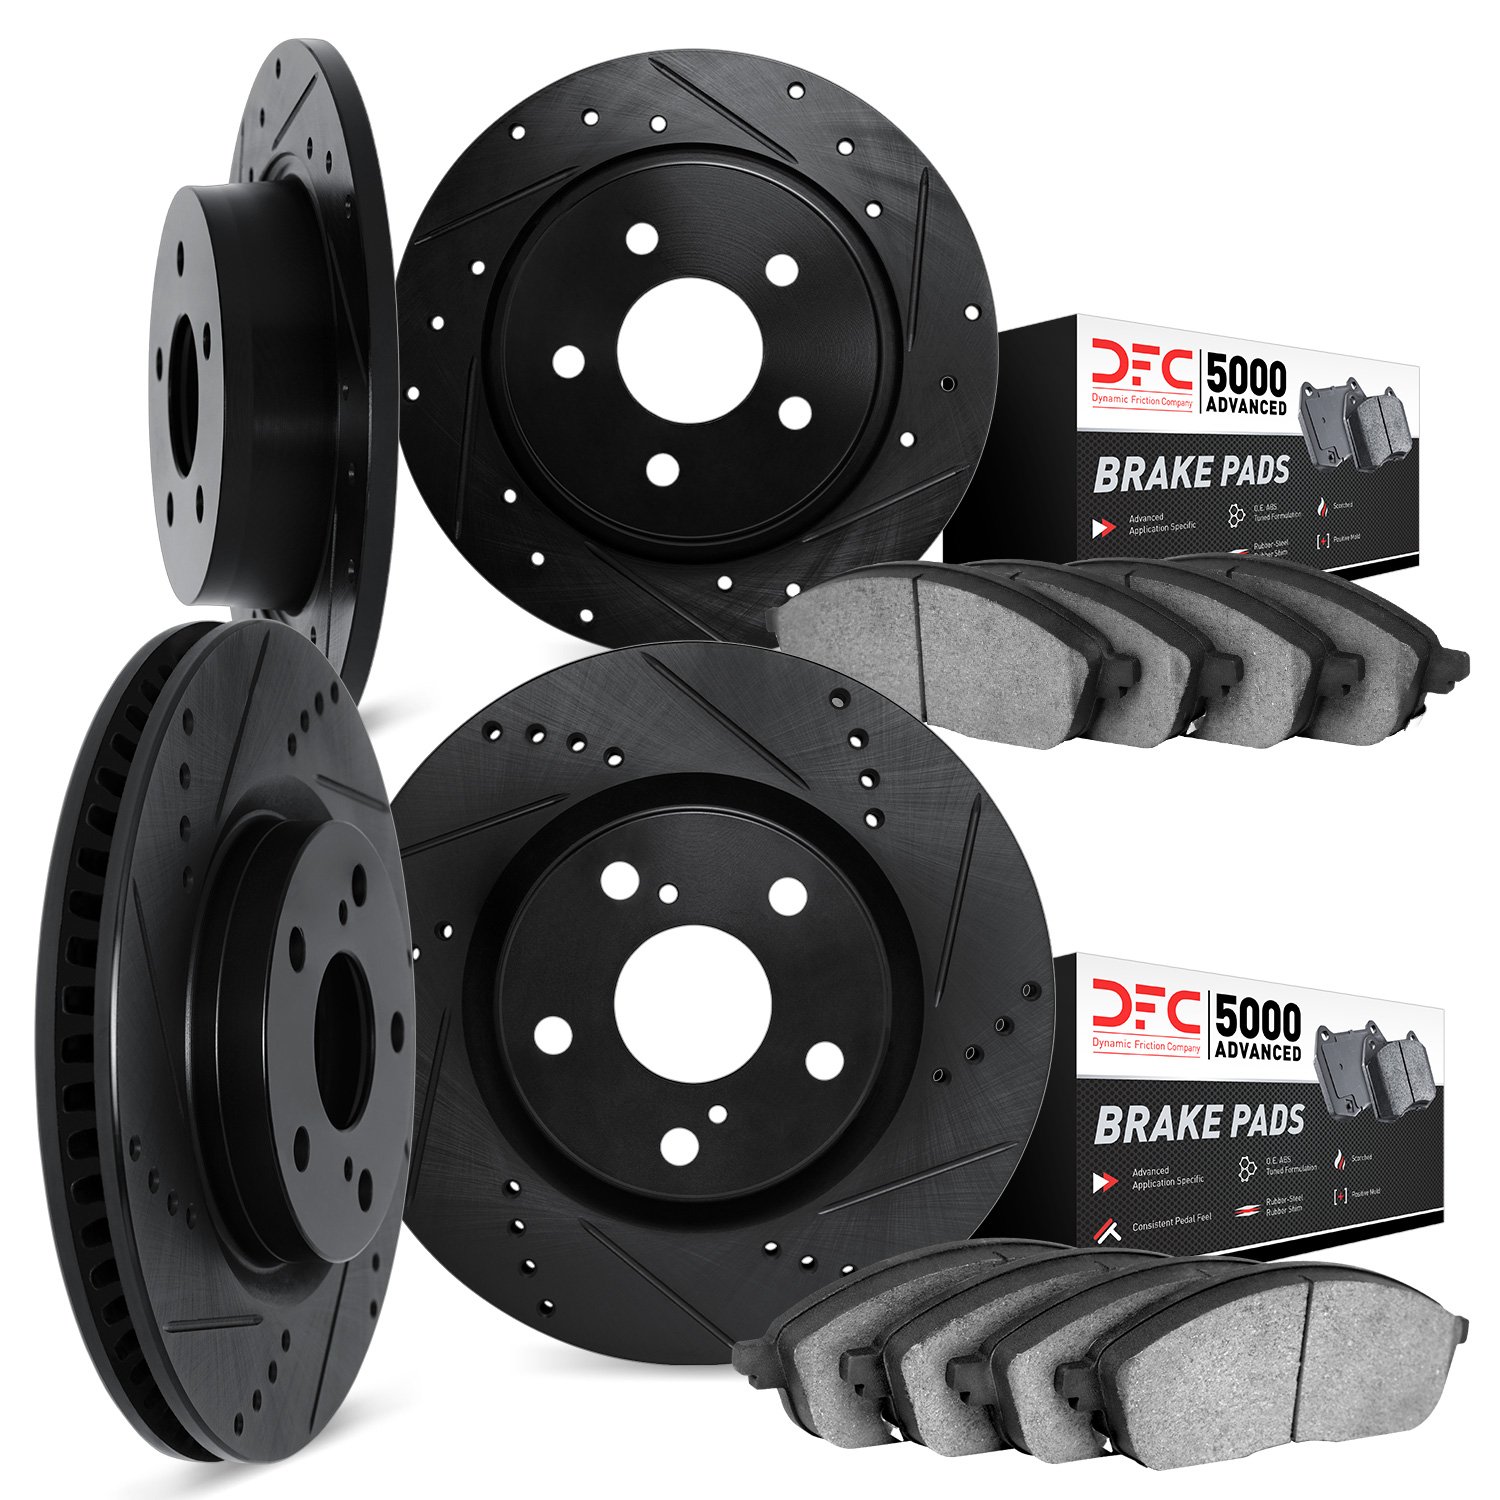 8504-76154 Drilled/Slotted Brake Rotors w/5000 Advanced Brake Pads Kit [Black], 2004-2010 Lexus/Toyota/Scion, Position: Front an